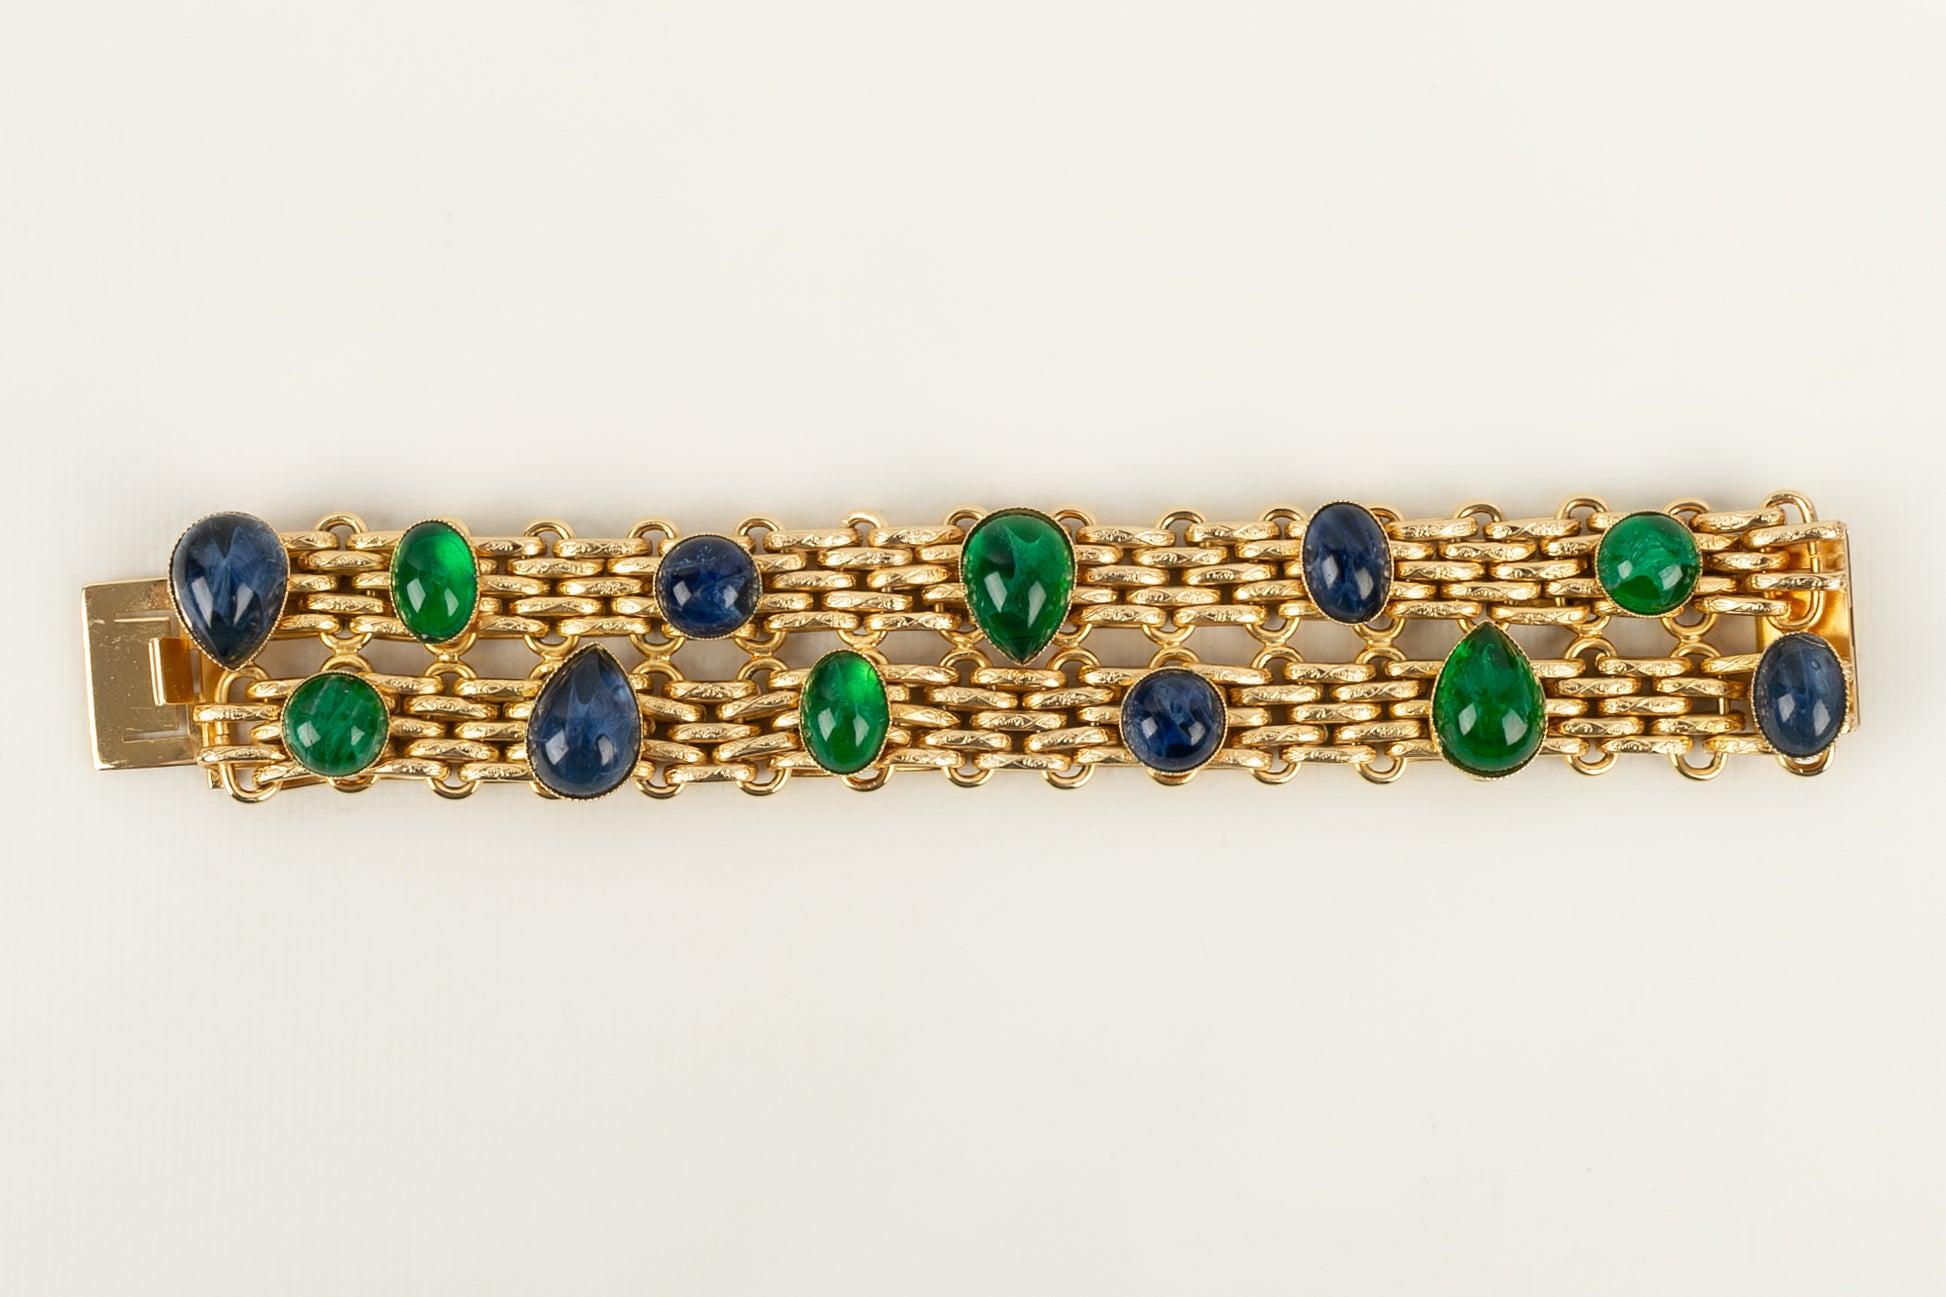 Dior - (Made in Germany) Bracelet in golden metal with cabochons in glass paste.

Additional information:
Condition: Very good condition
Dimensions: Length: 20 cm

Seller Reference: BRA179
